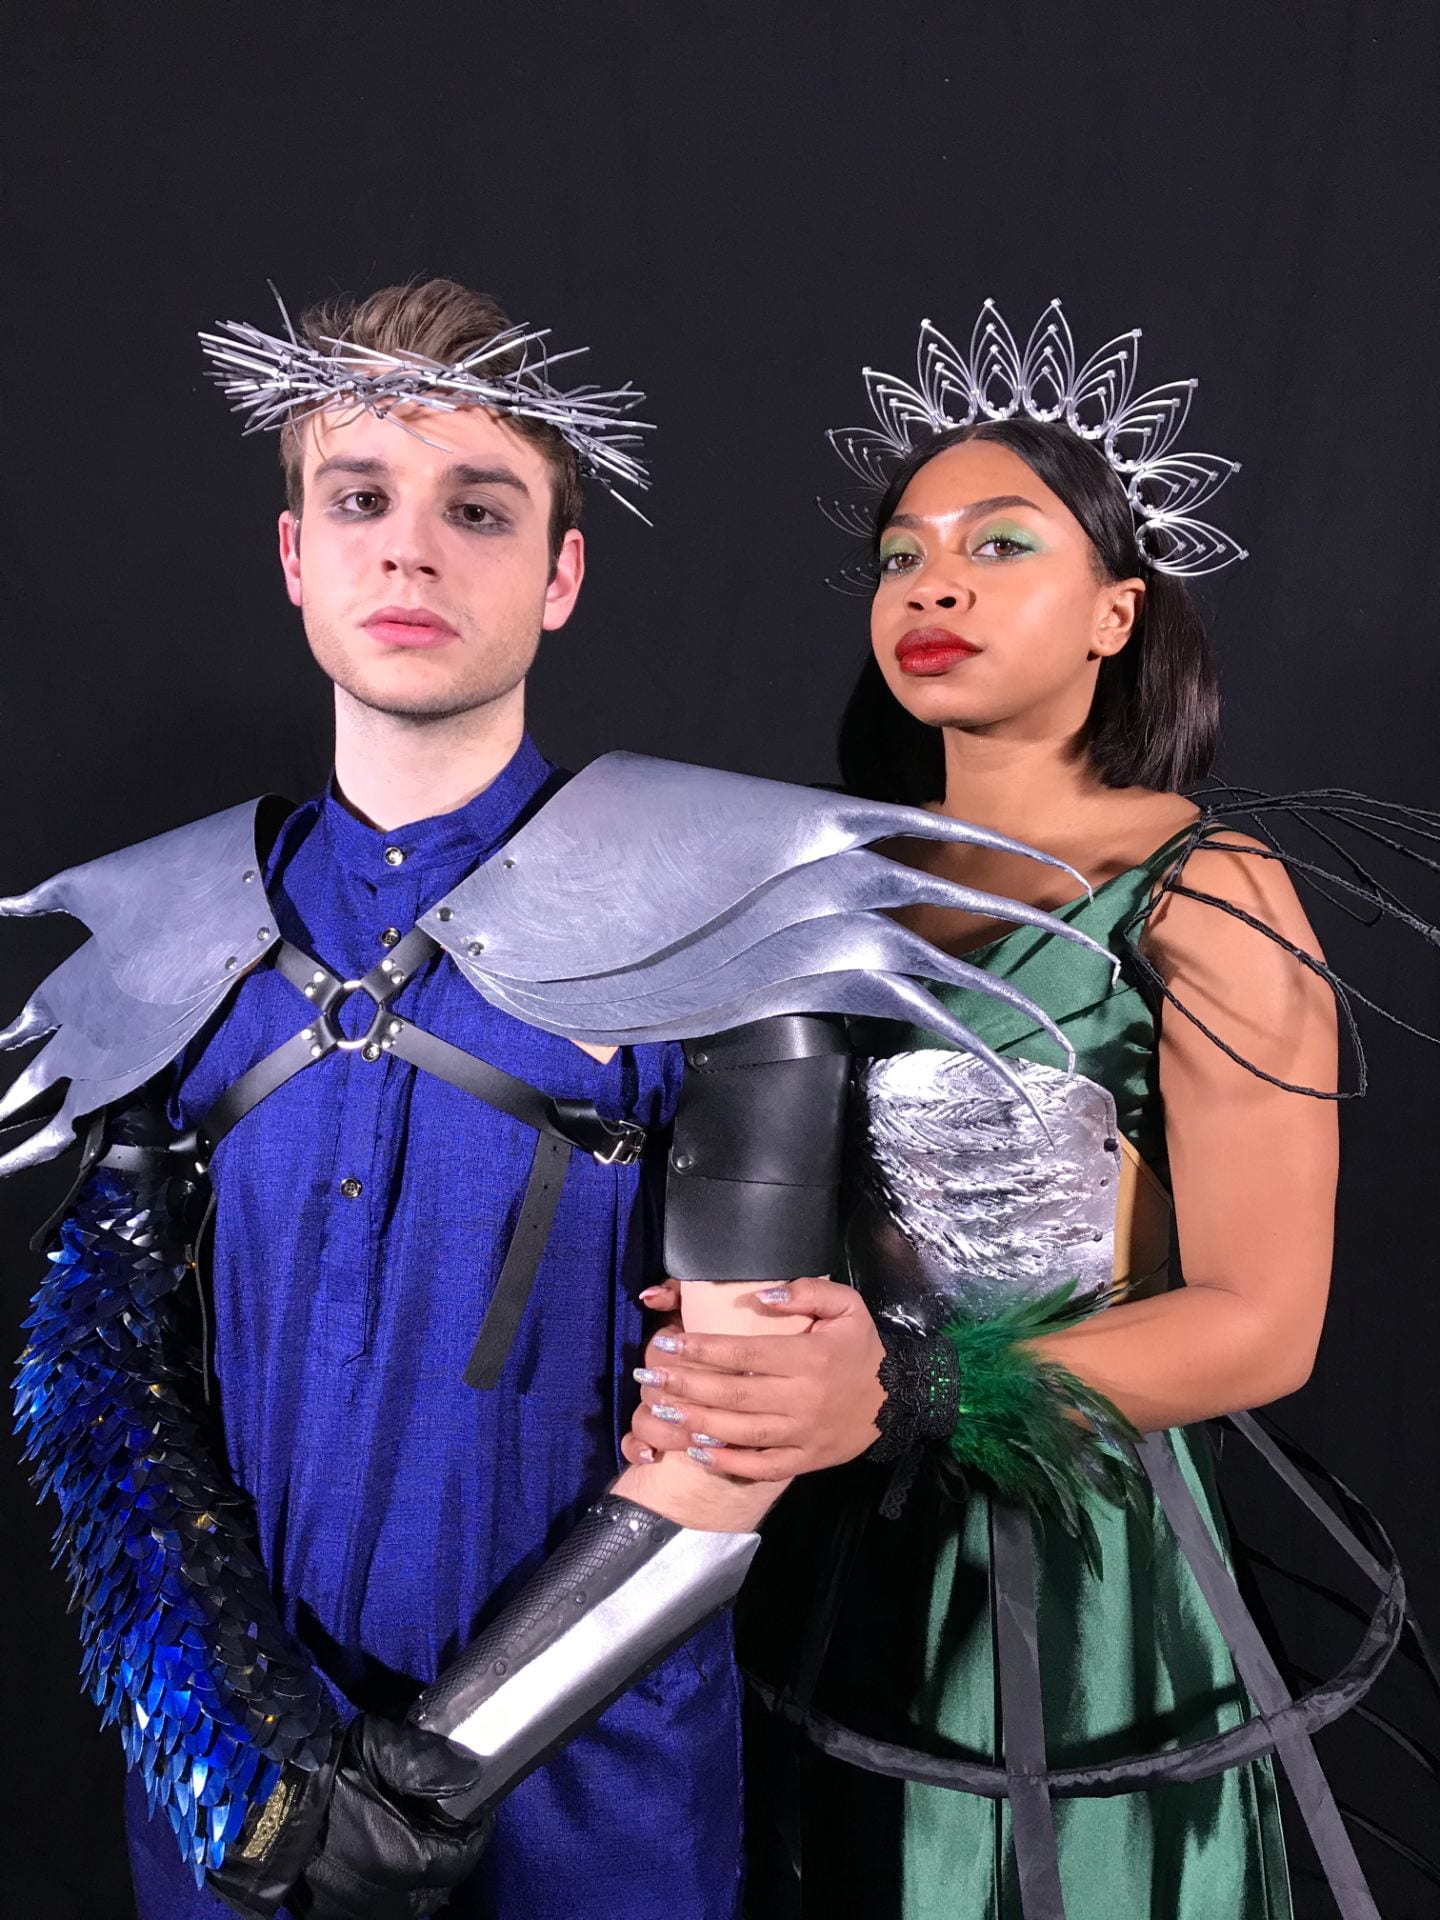 Toby Davis and Eboni Cain portray Claudius and Gertrude in Hamlet: Fall of the Sparrow.